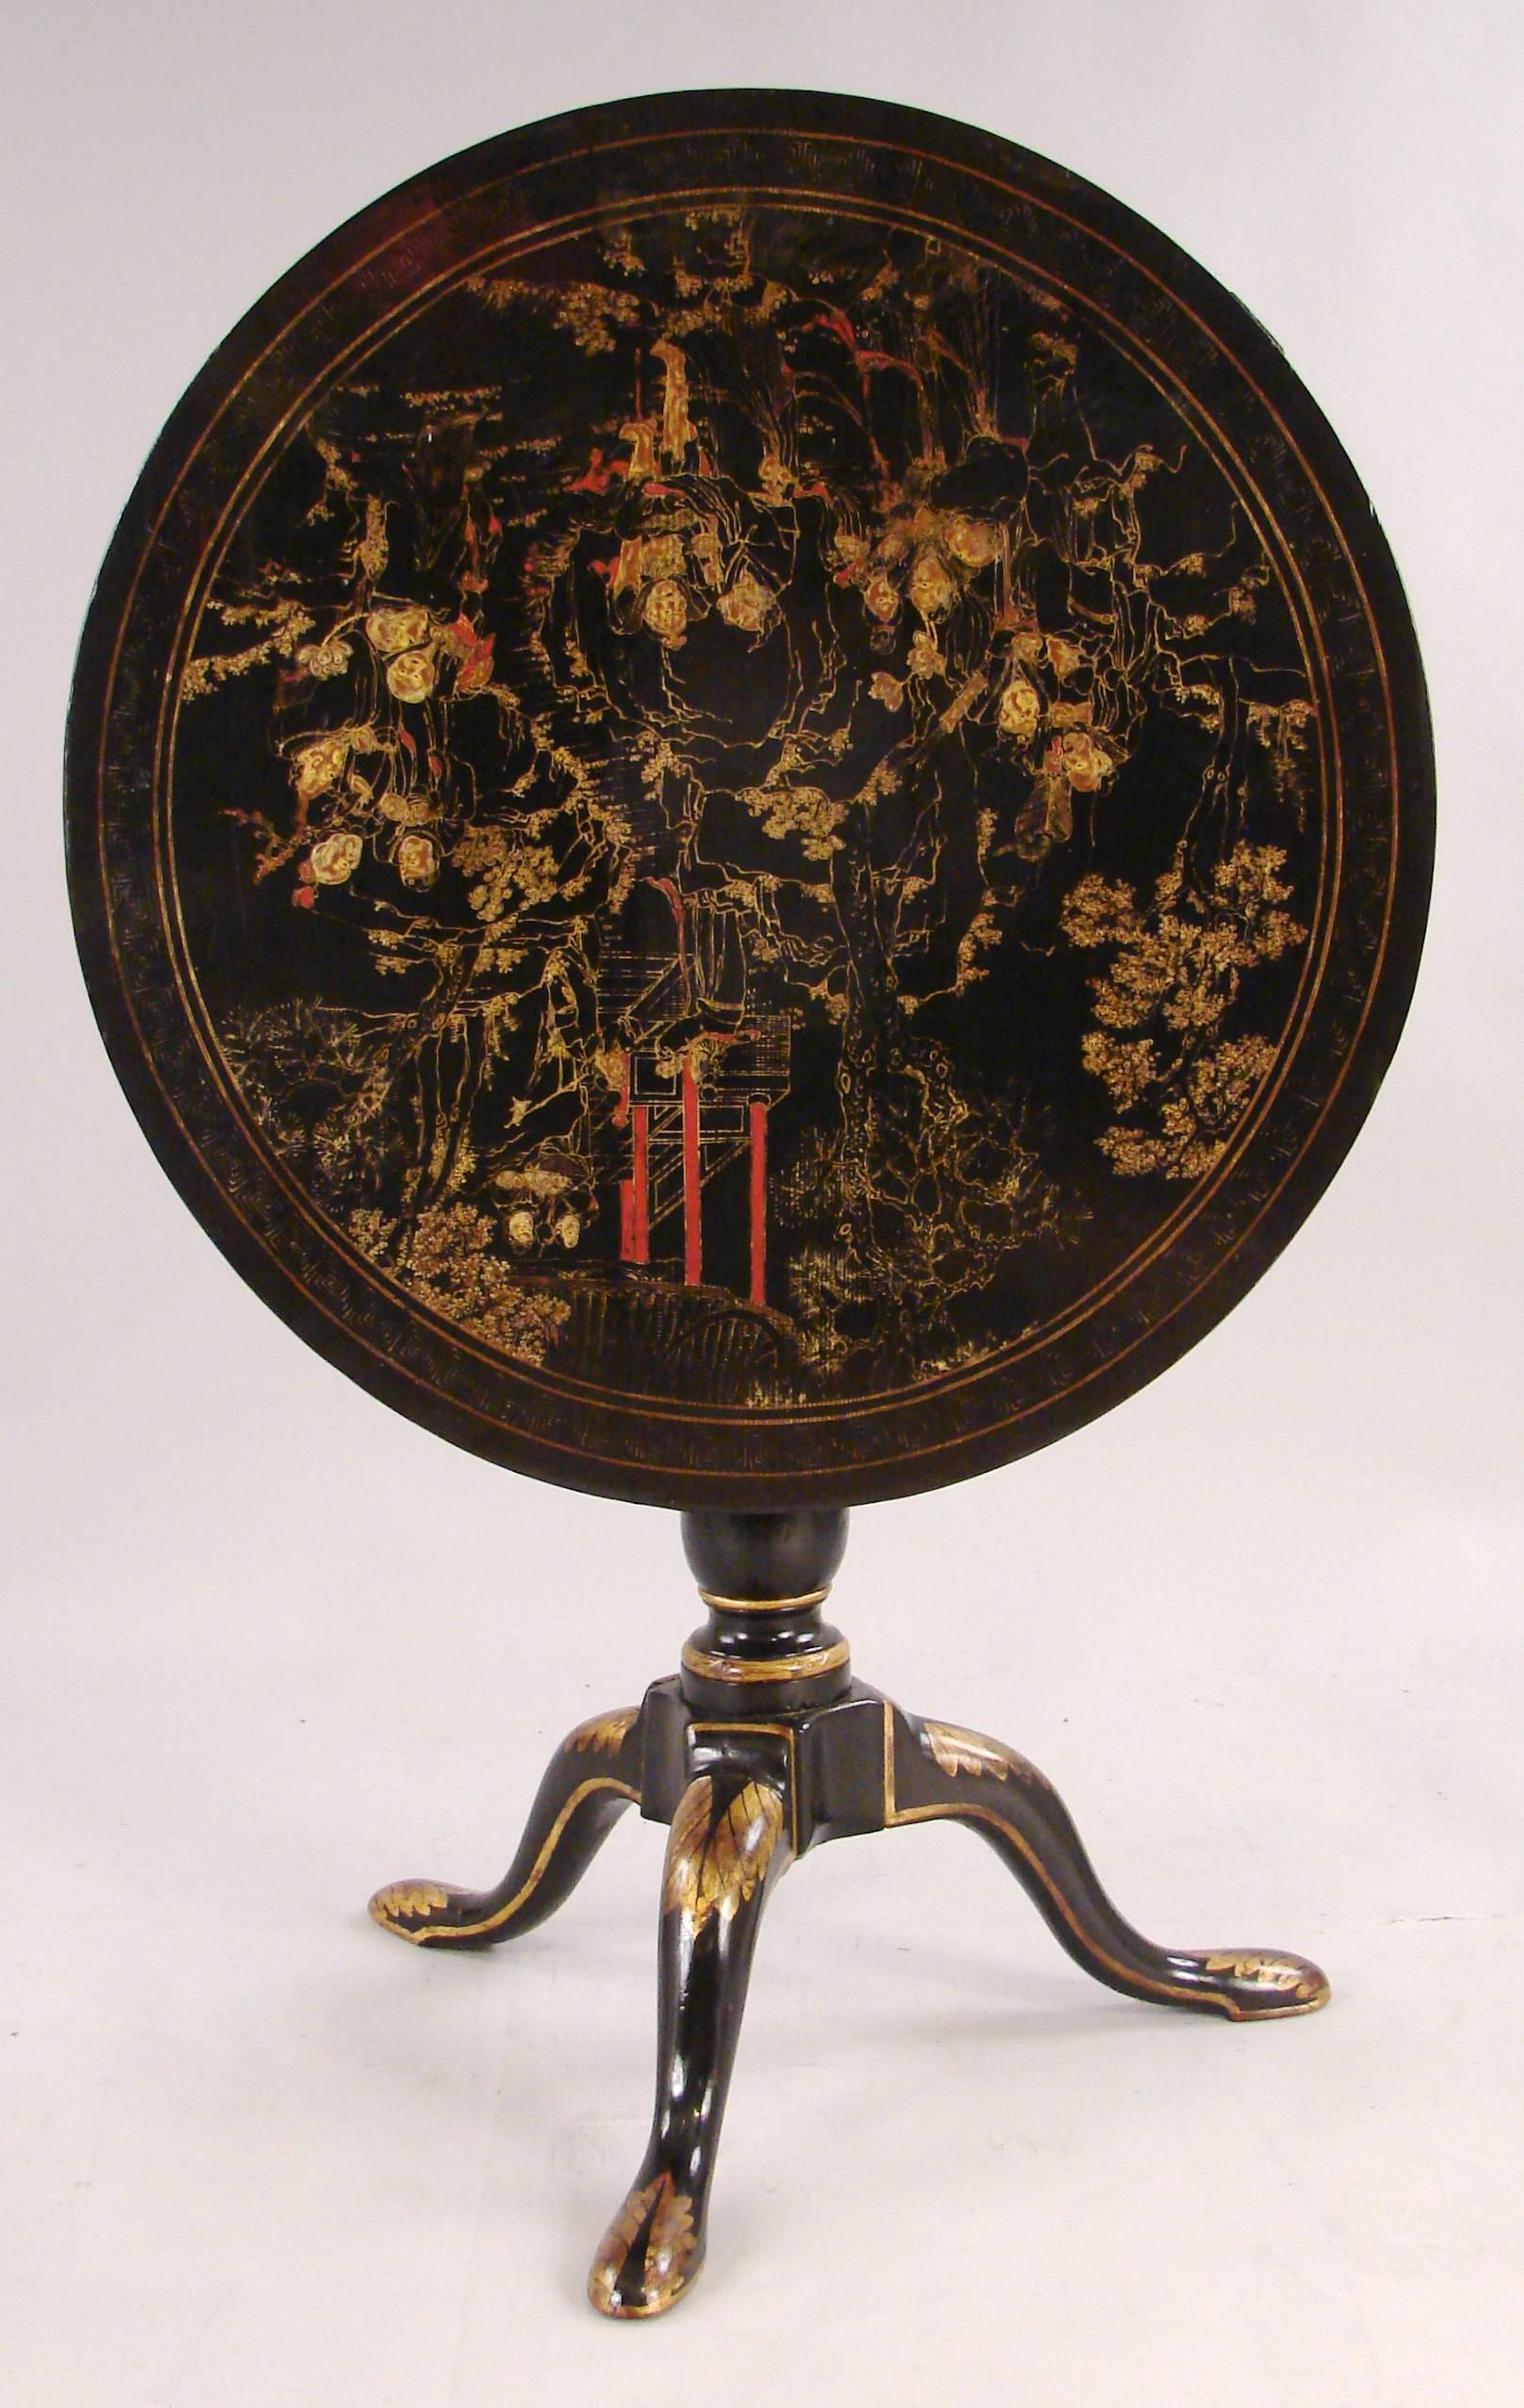 A George III style black lacquer and gilt tilt-top table with a turned columnar support on tripod base ending in pad feet, circa 1800-1820. Decoration of a later date.